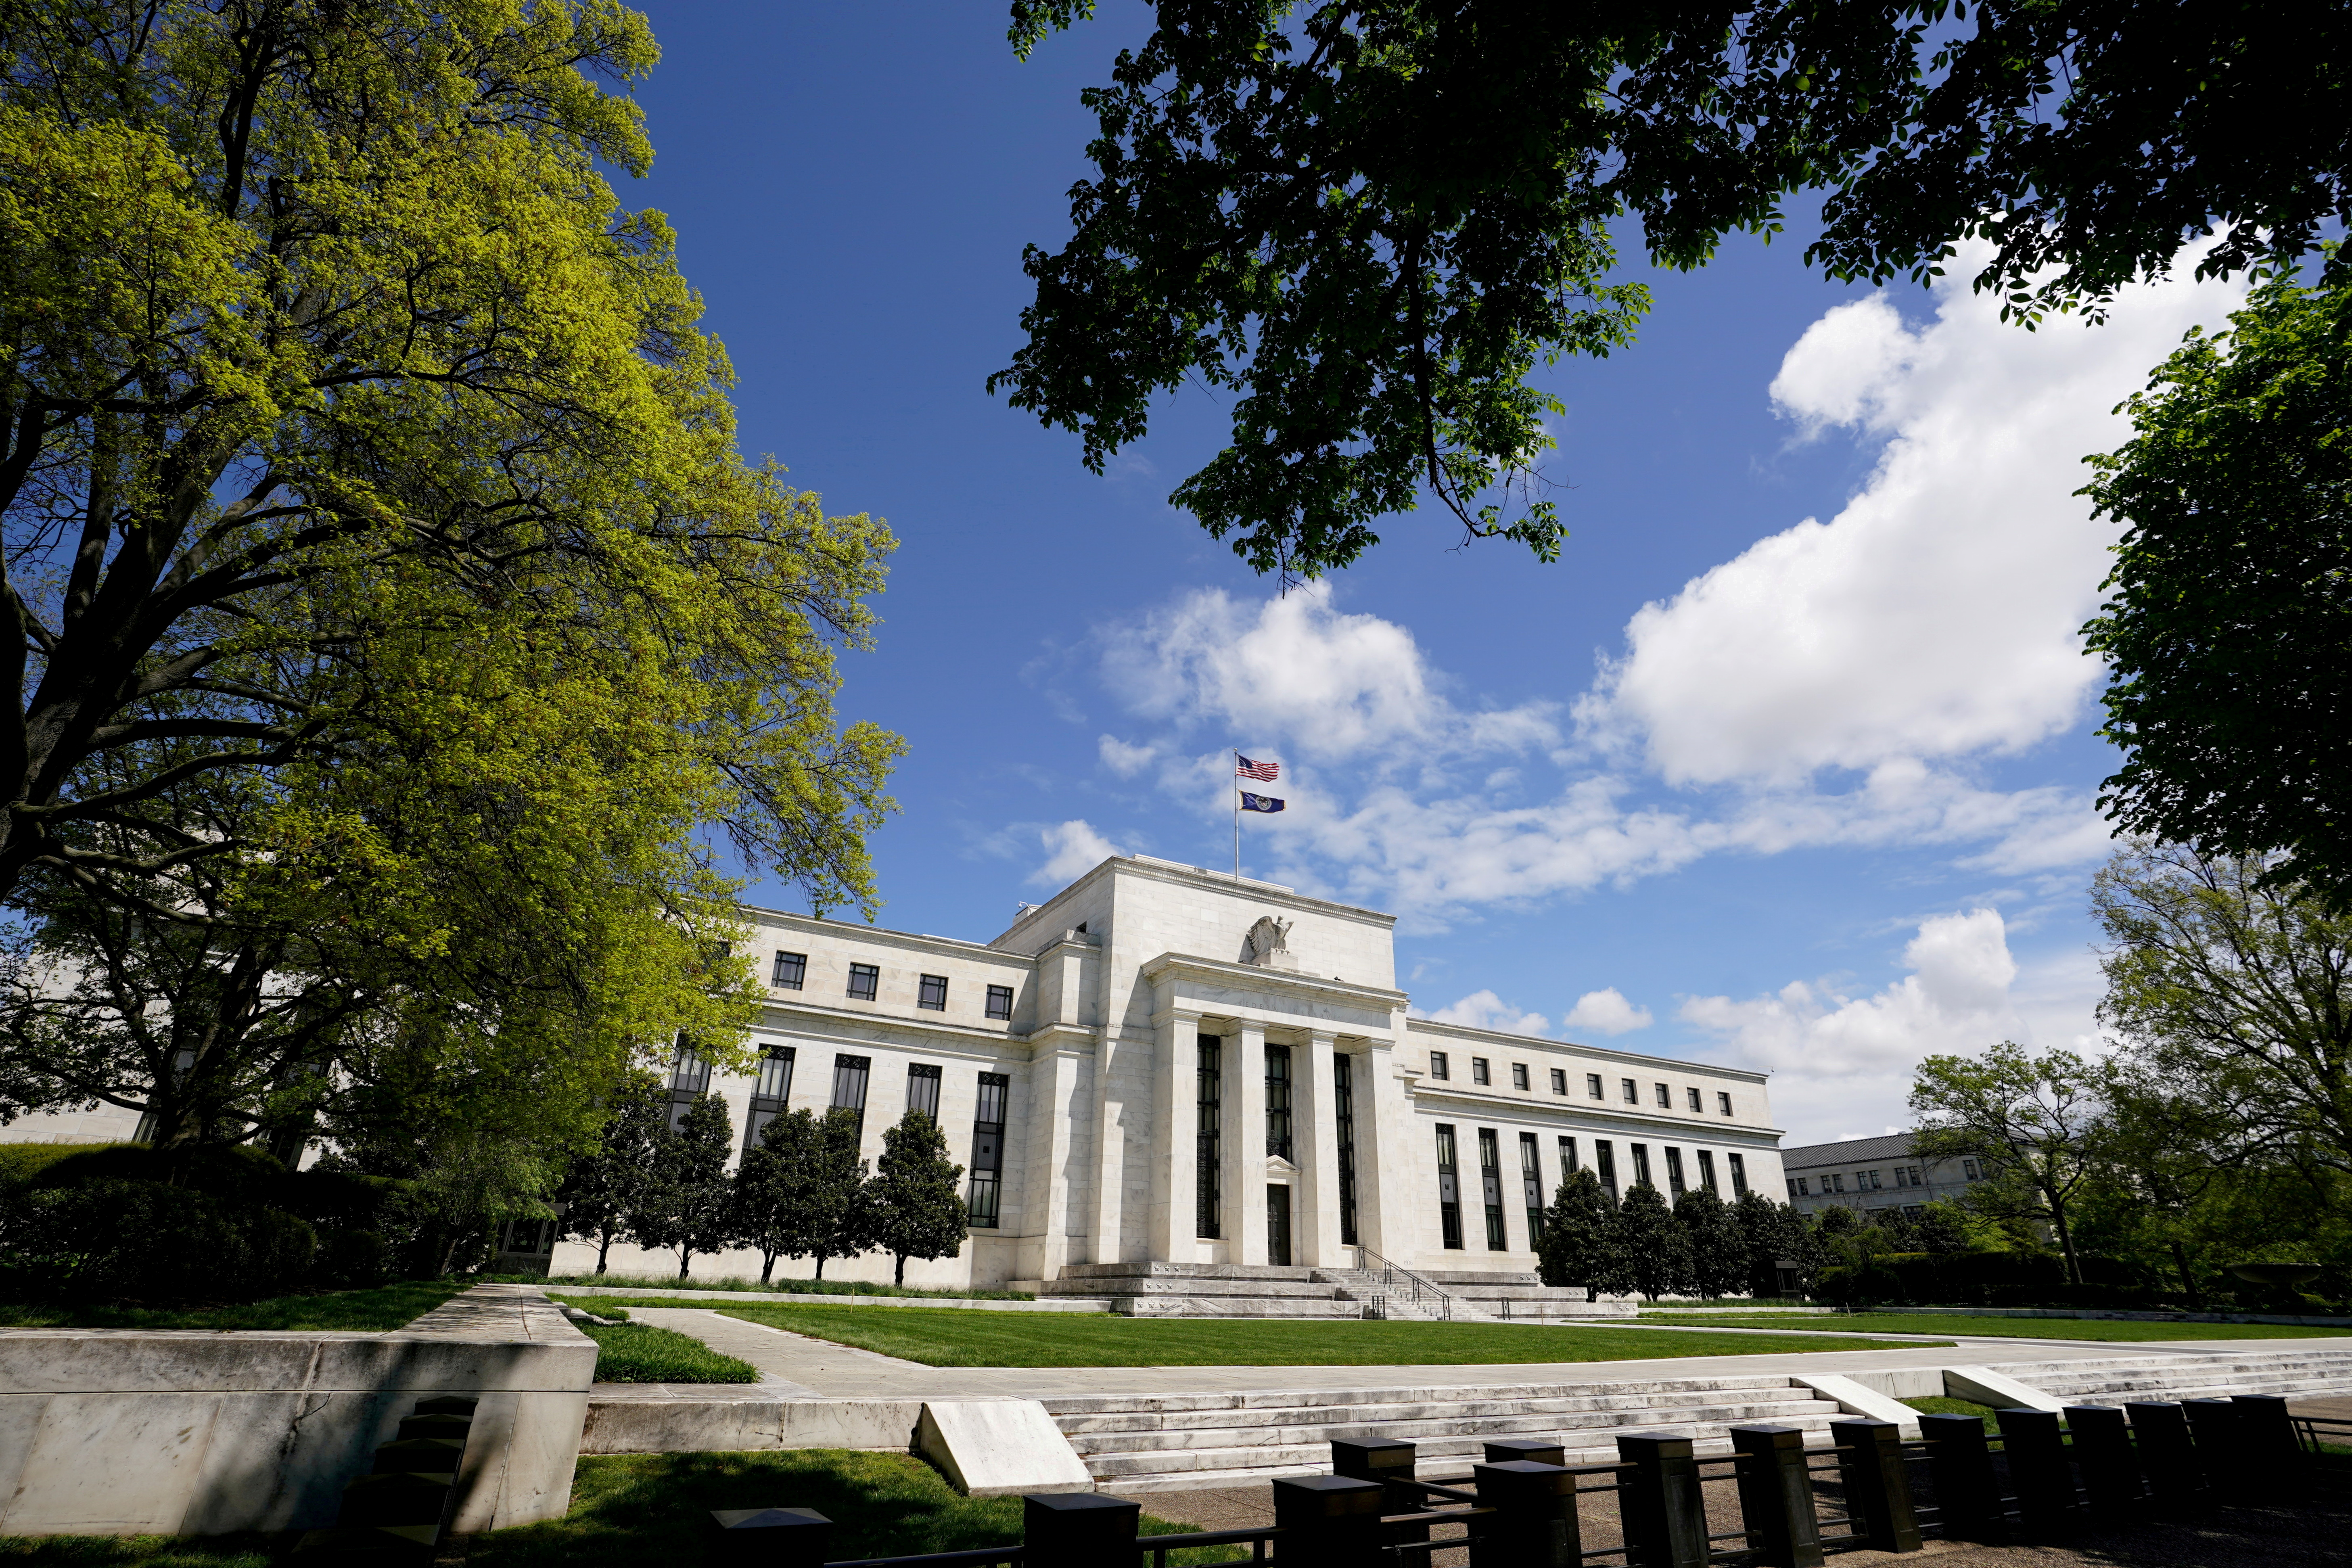 The Federal Reserve in Washington